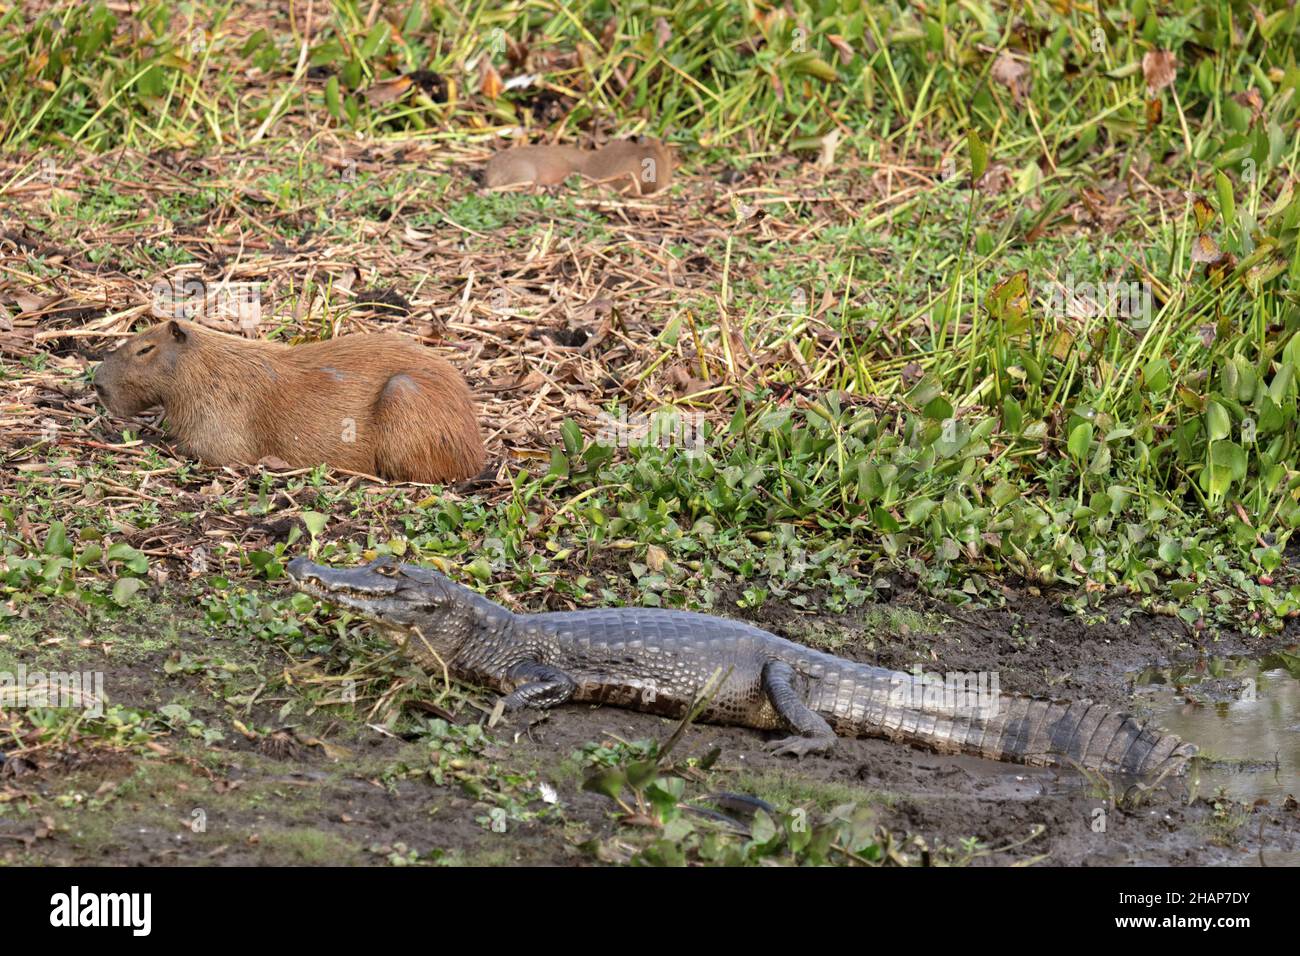 Caiman and capybara sitting next t each other Stock Photo